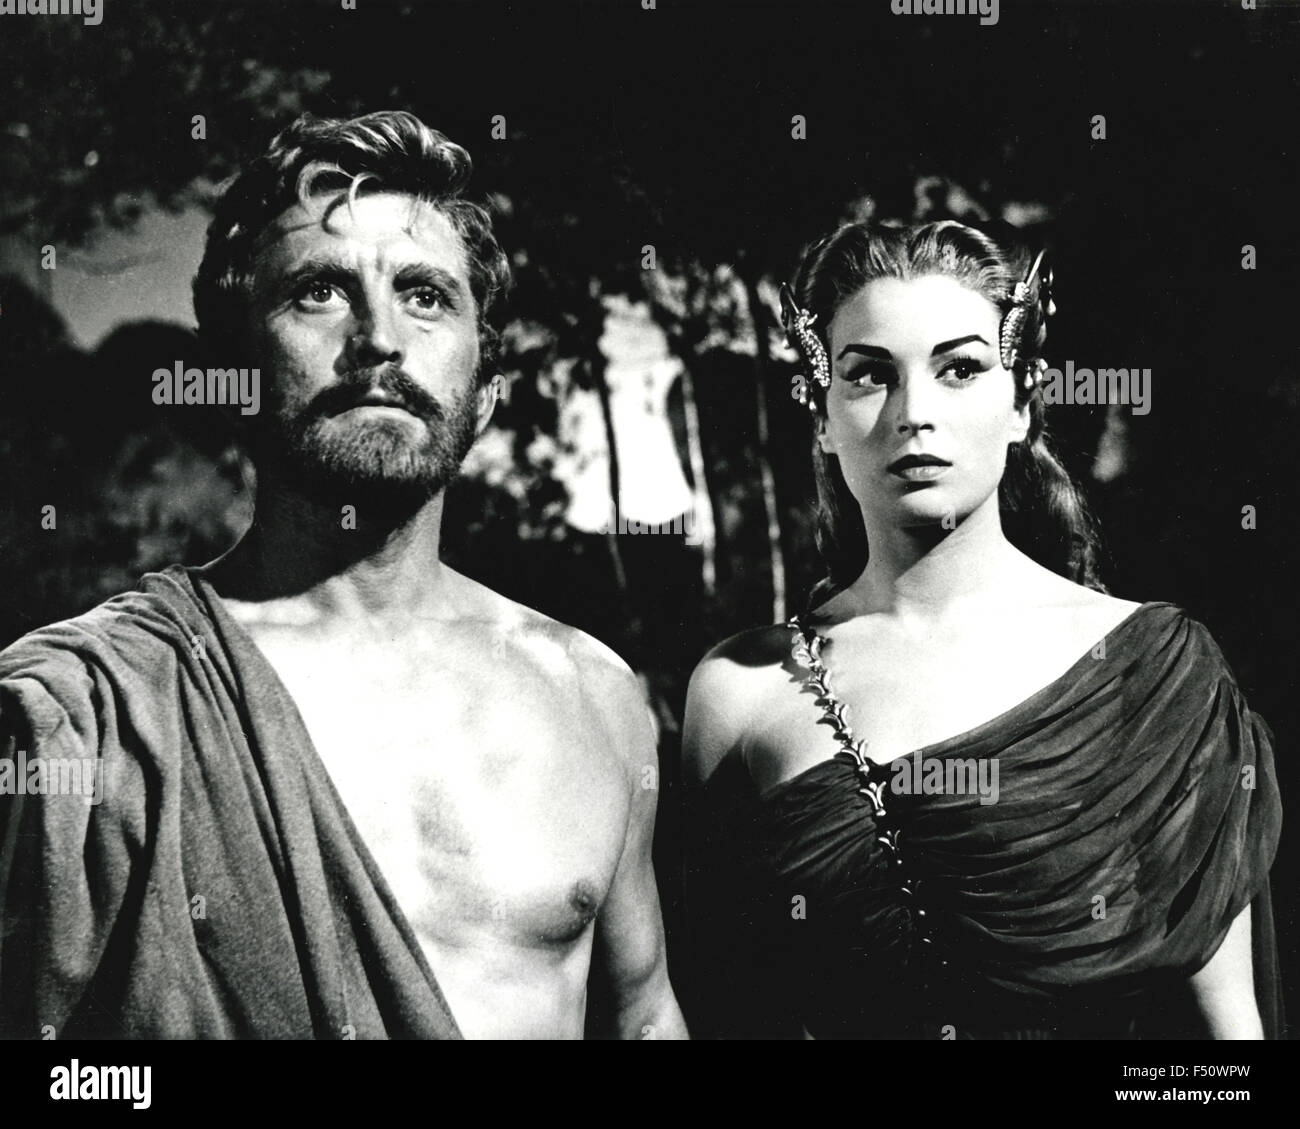 The actors Kirk Douglas and Silvana Mangano in a scene from the film 'Ulysses', Italy Stock Photo